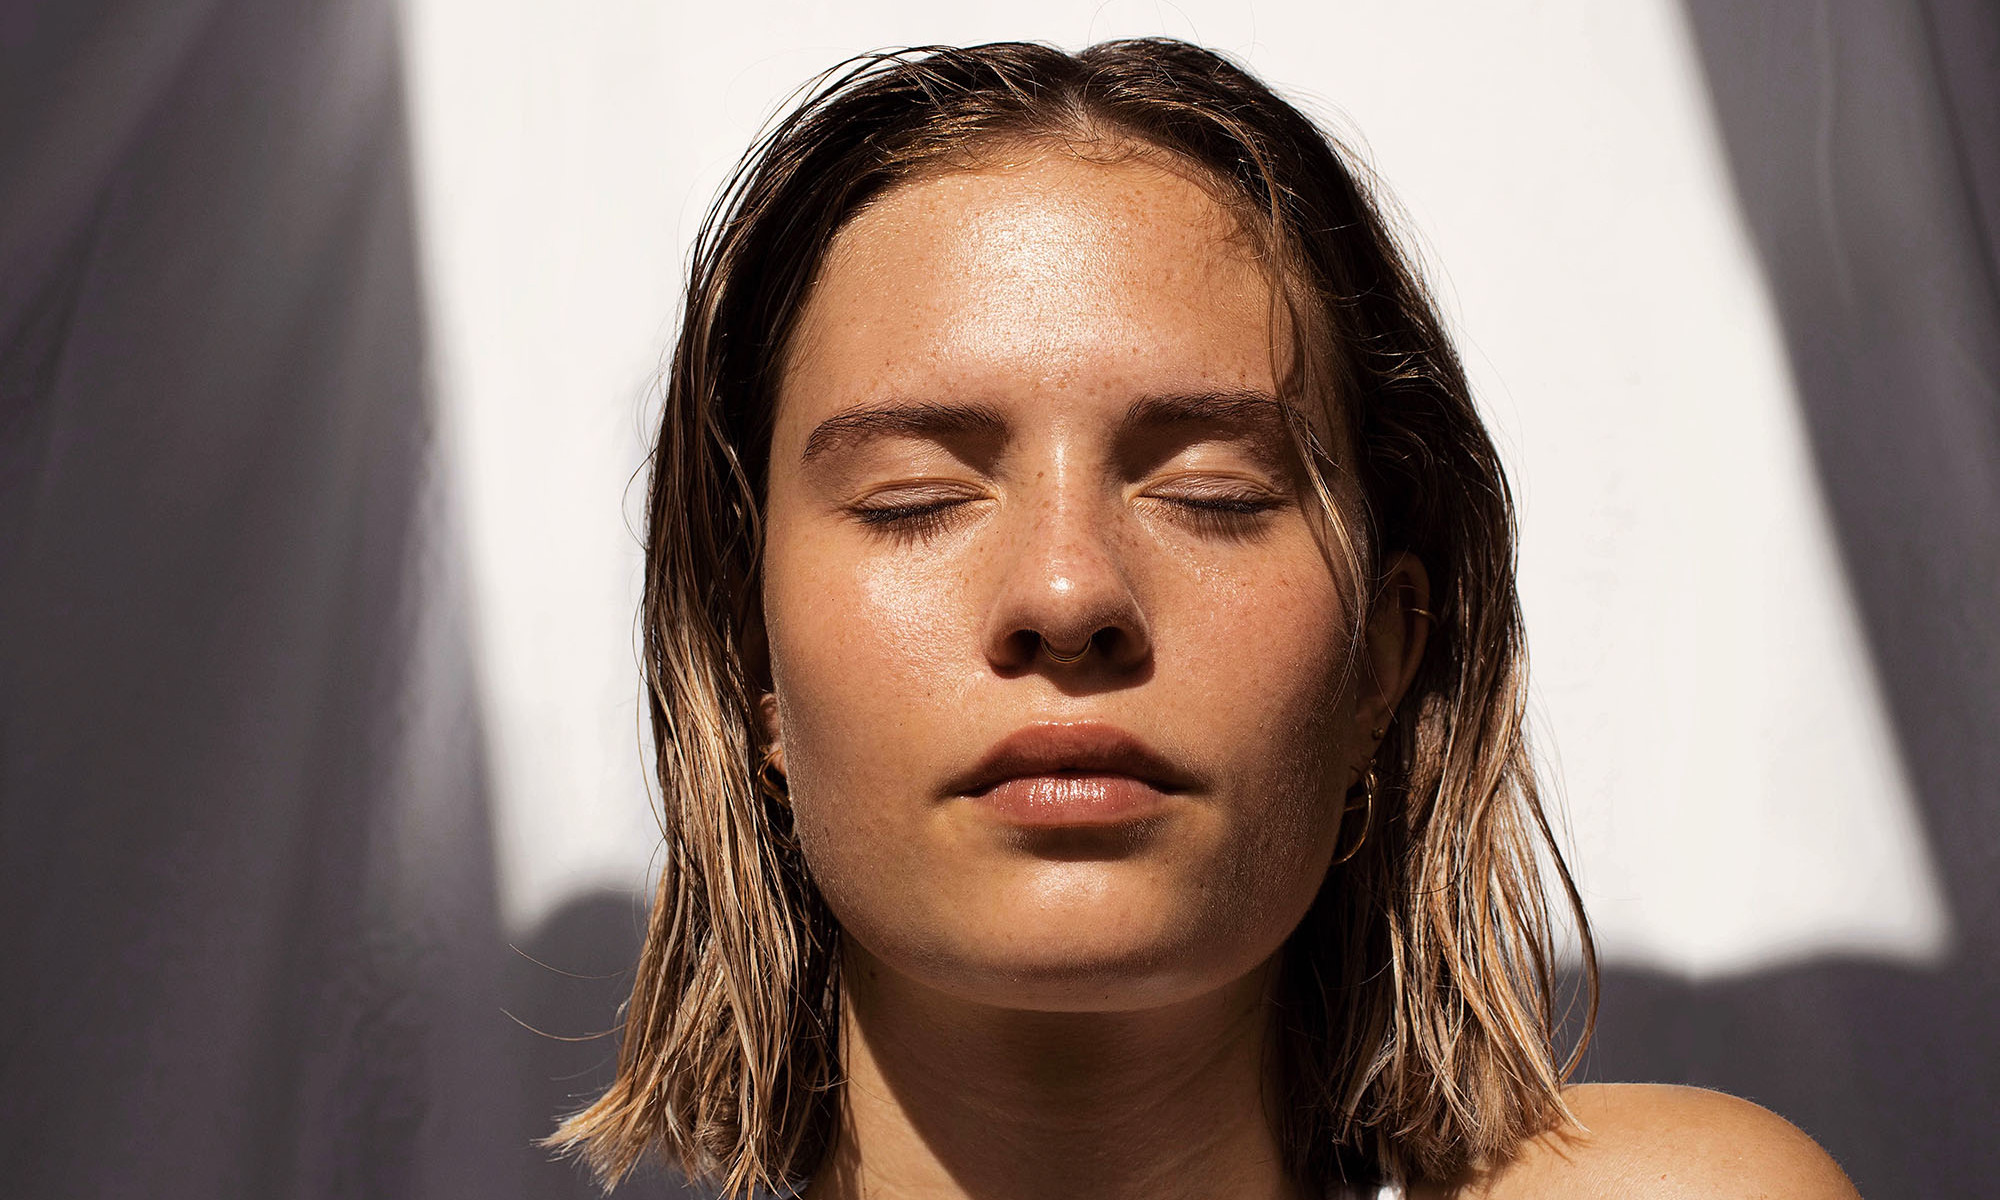 Dry, Wintry Skin Is No Fun — Keep Your Dew With This Routine